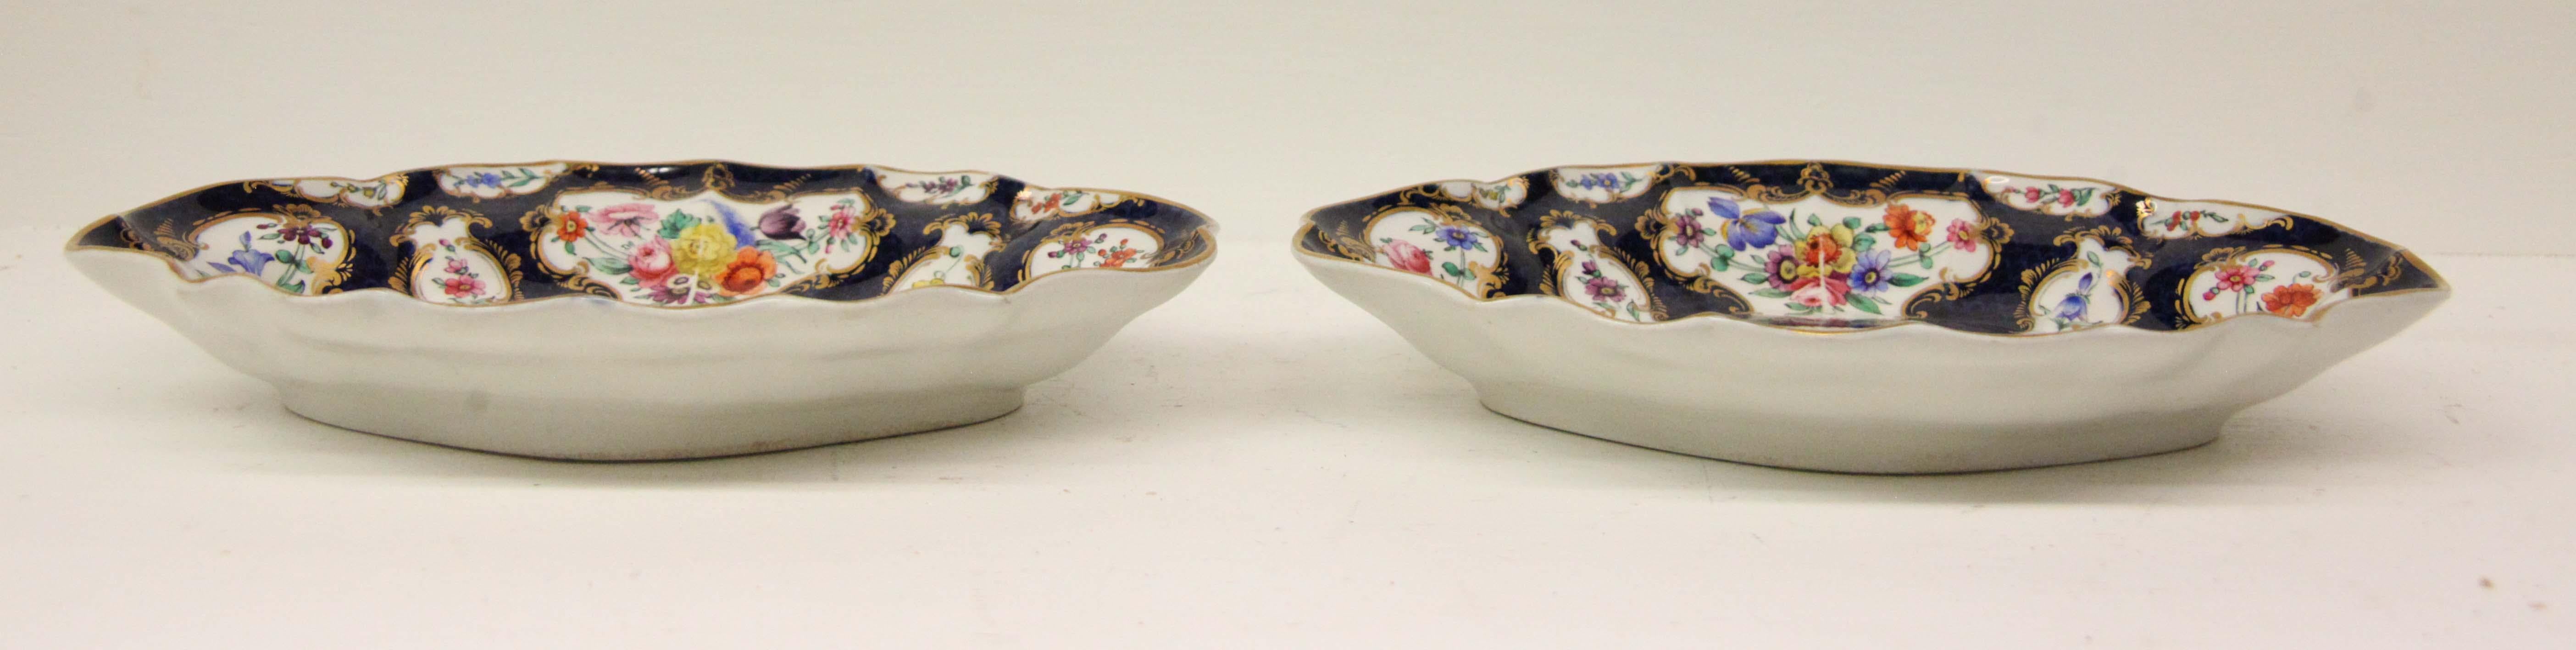 Pair of Royal Worcester Oval Dishes For Sale 5